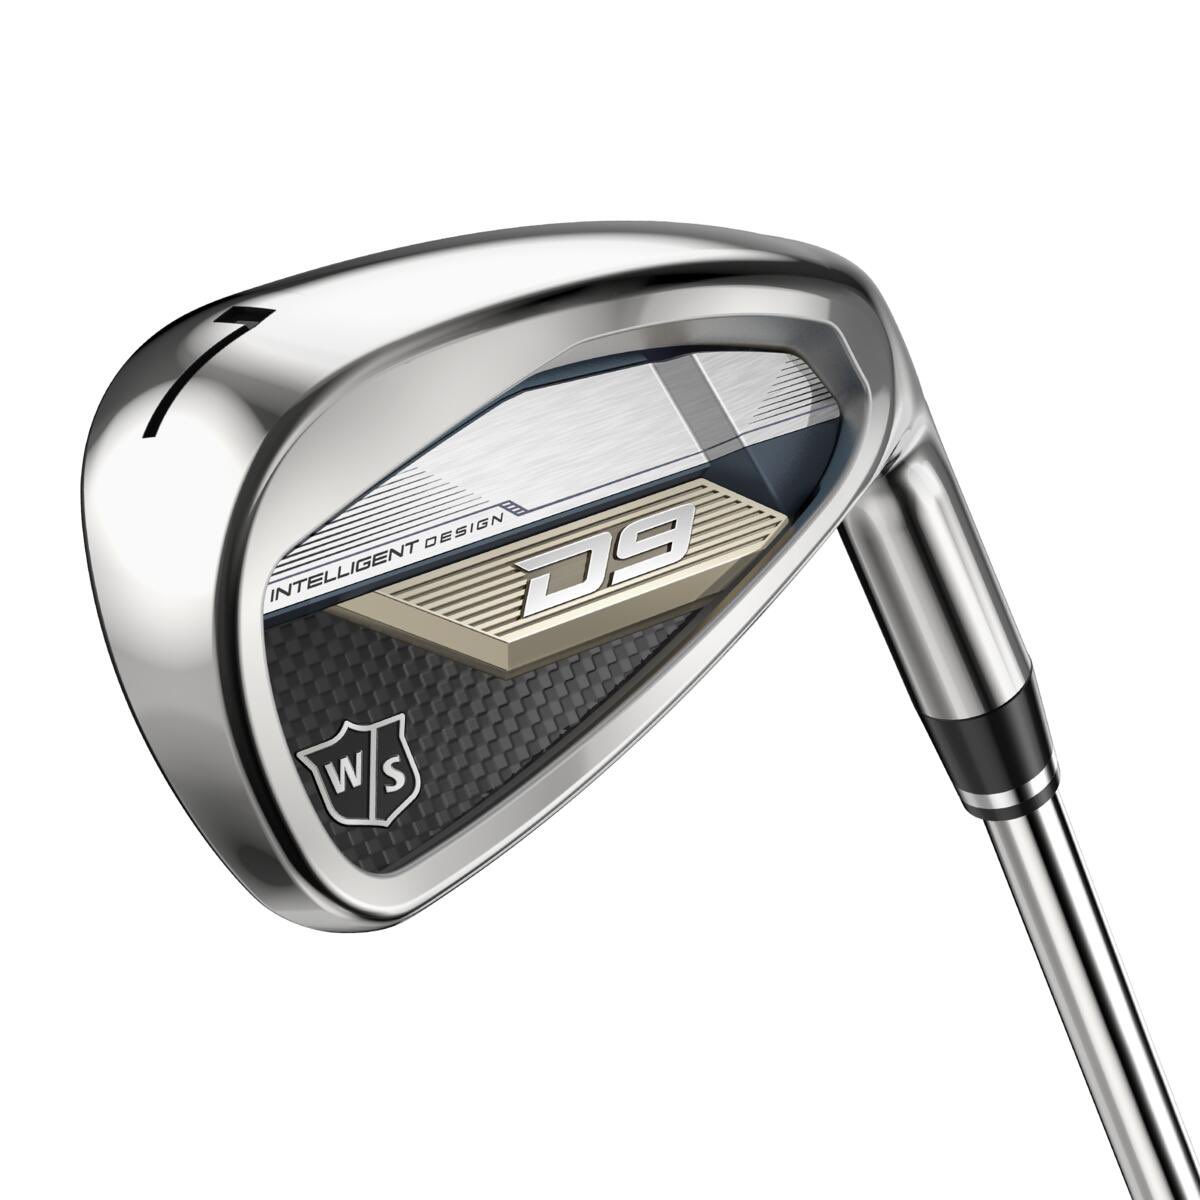 The brand new @WilsonGolfEU D9 range of woods & irons are now available on our website 👍 The reviews on this line-up have been amazing & such a good price point 🔥 Check them out here 👇 thegolfstore4u.co.uk/?post_type=pro…+